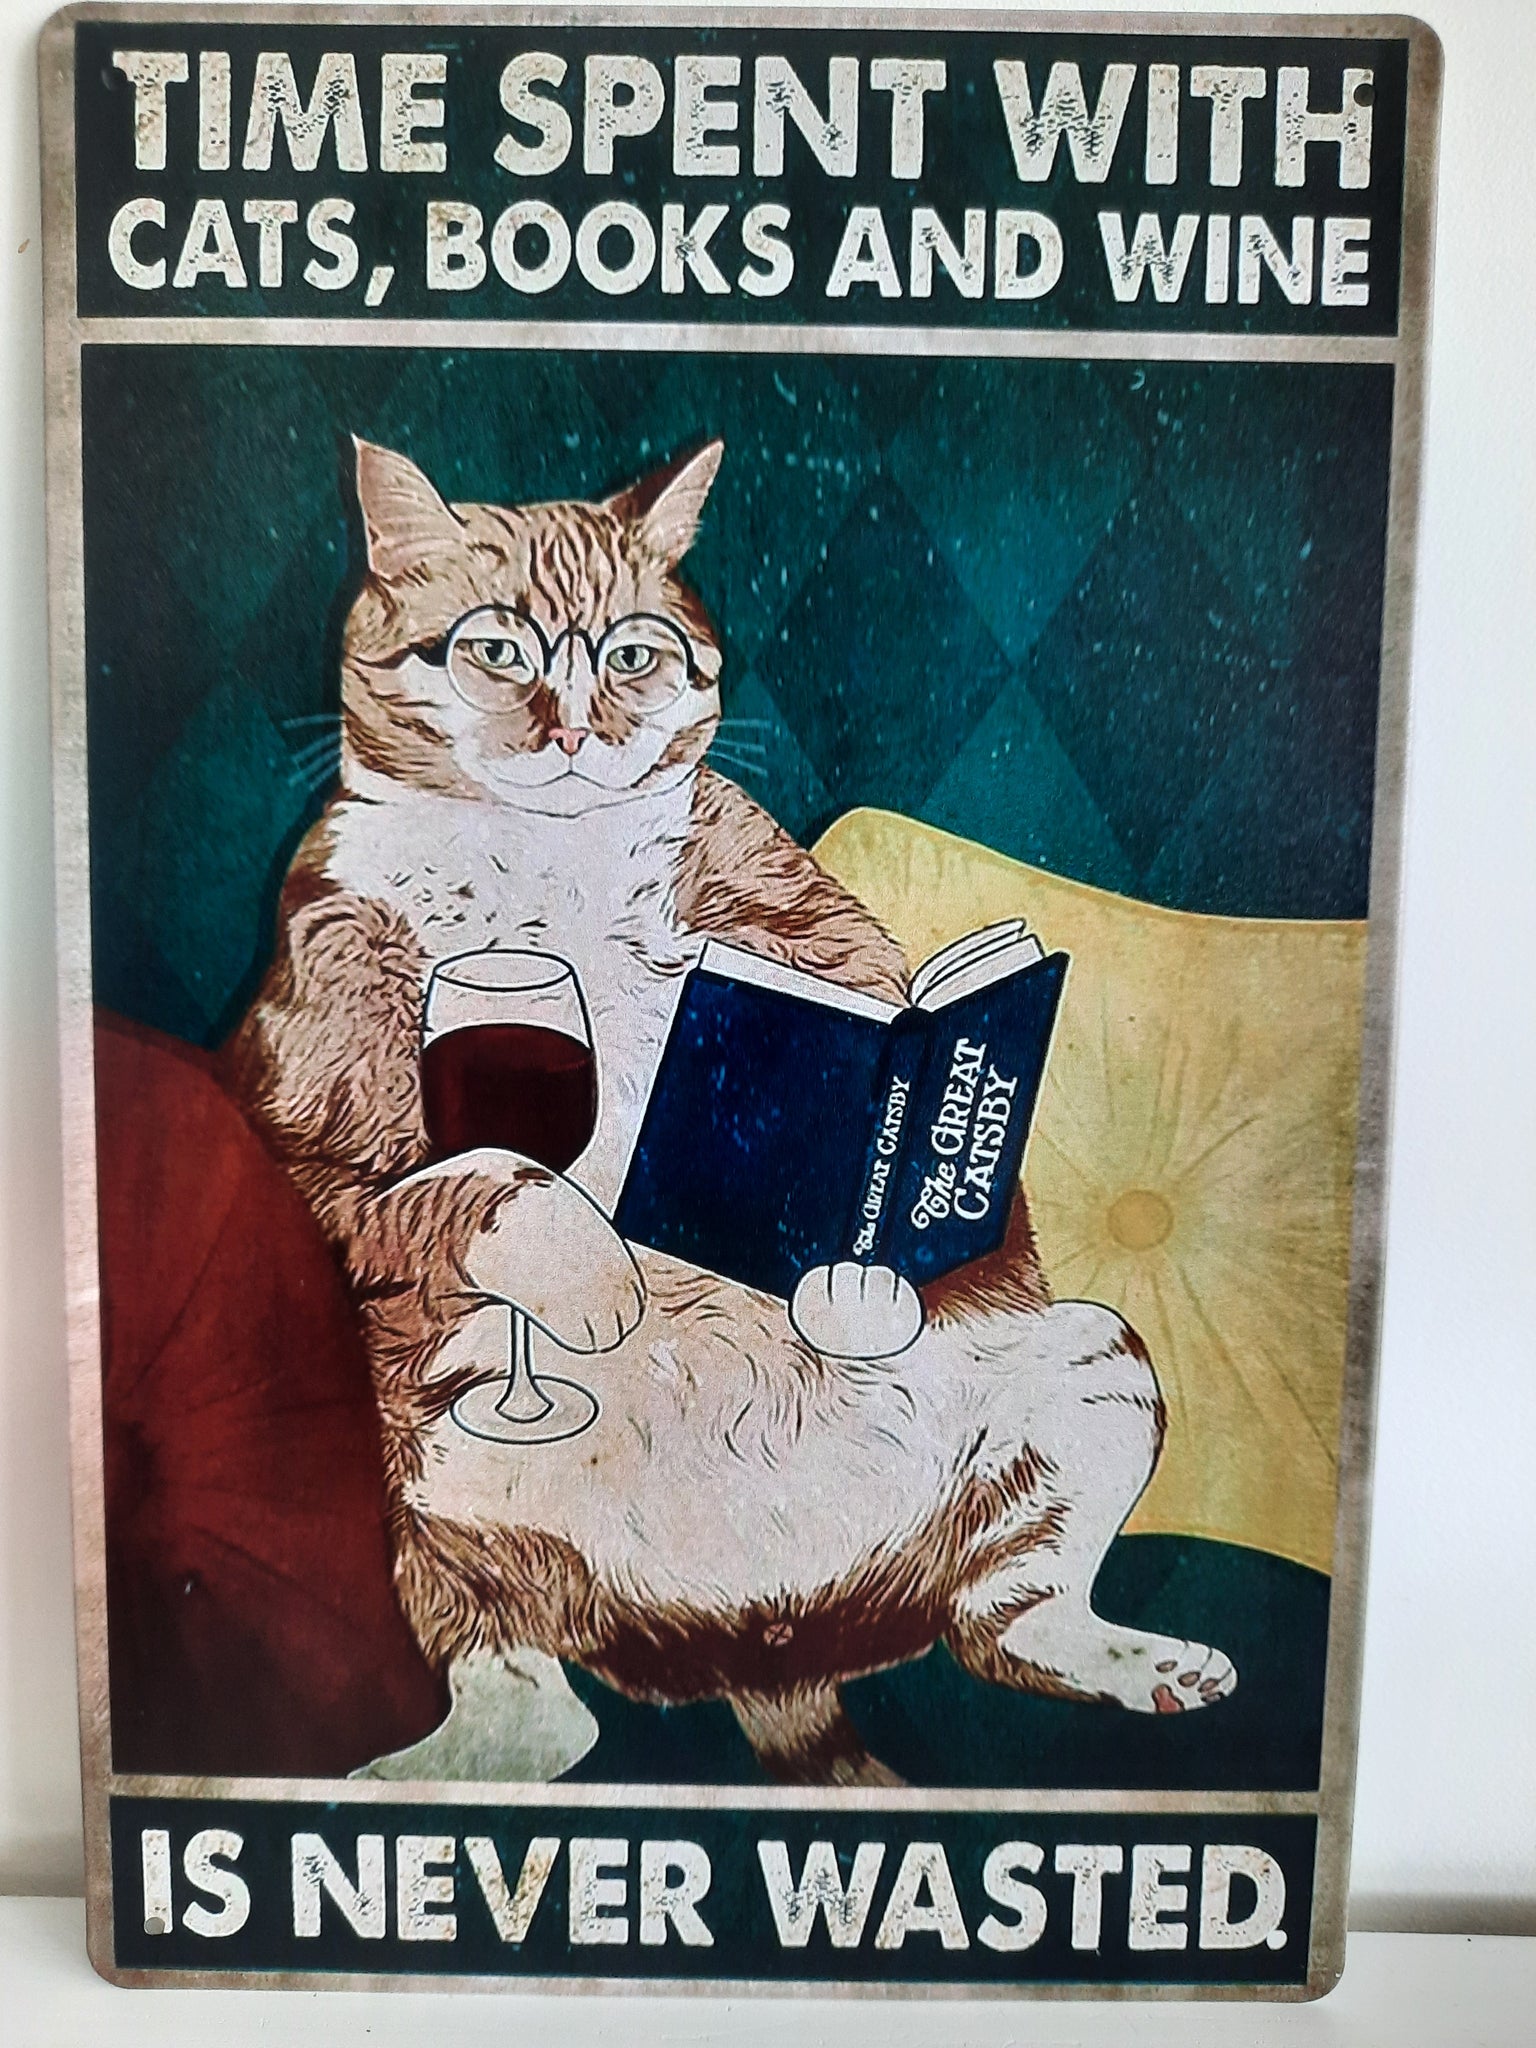 Vintage look Cat Themed Tin Wall Art - Time Spent with Books and Cats is never wasted